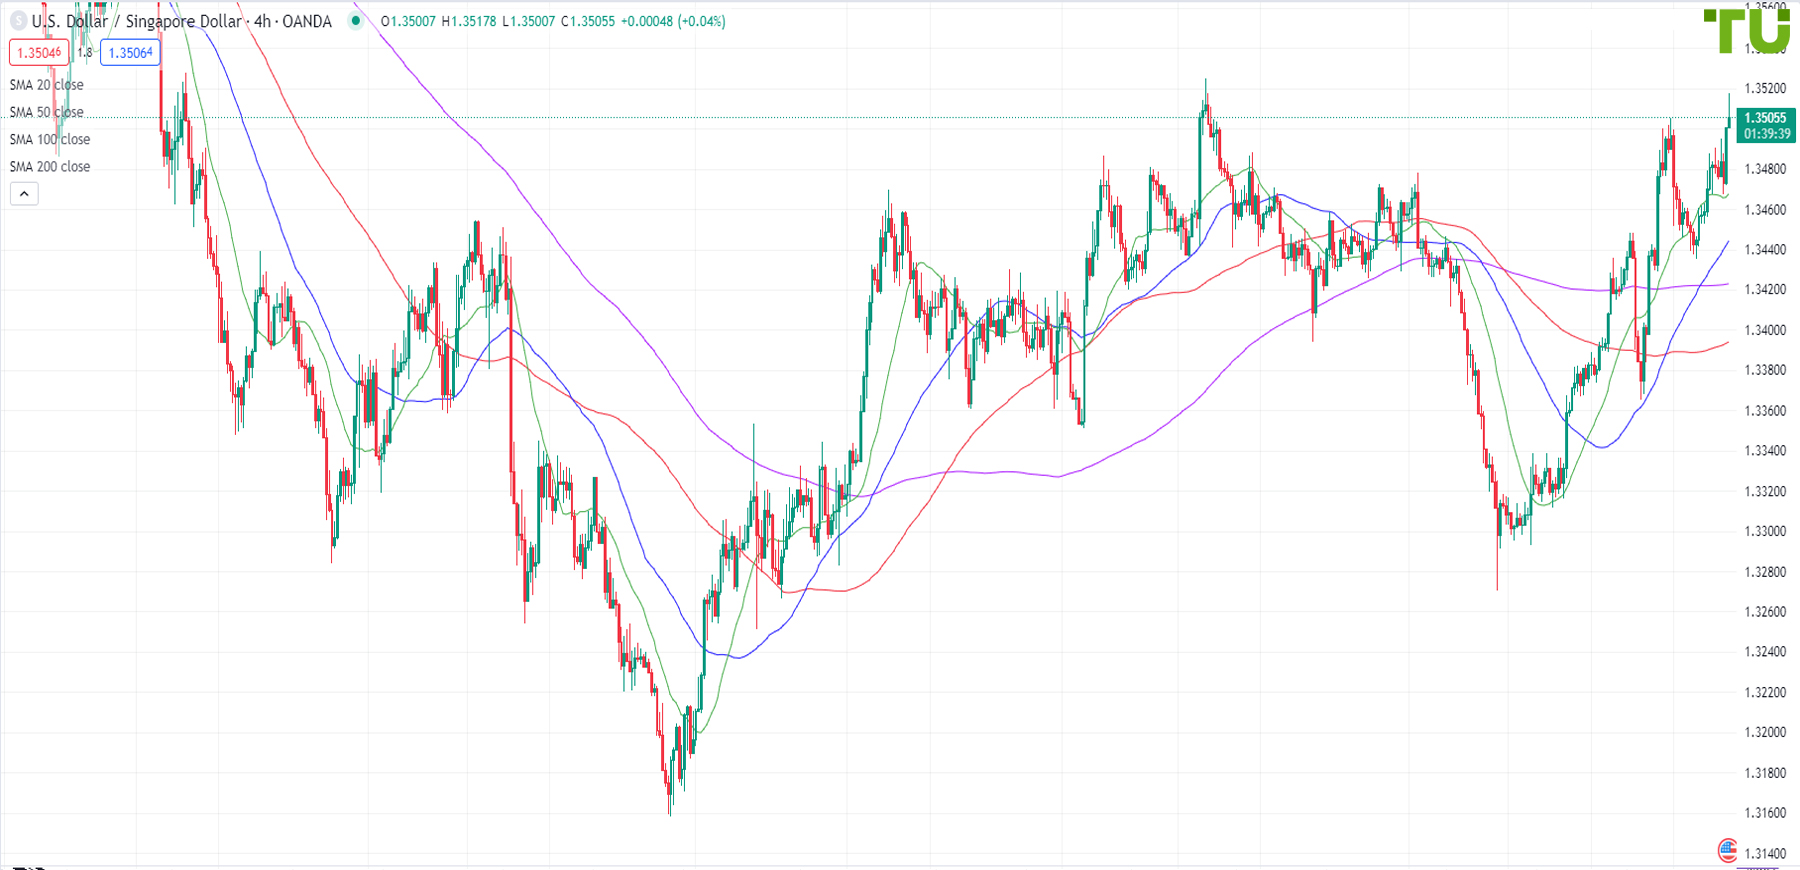 USD/SGD is buying again